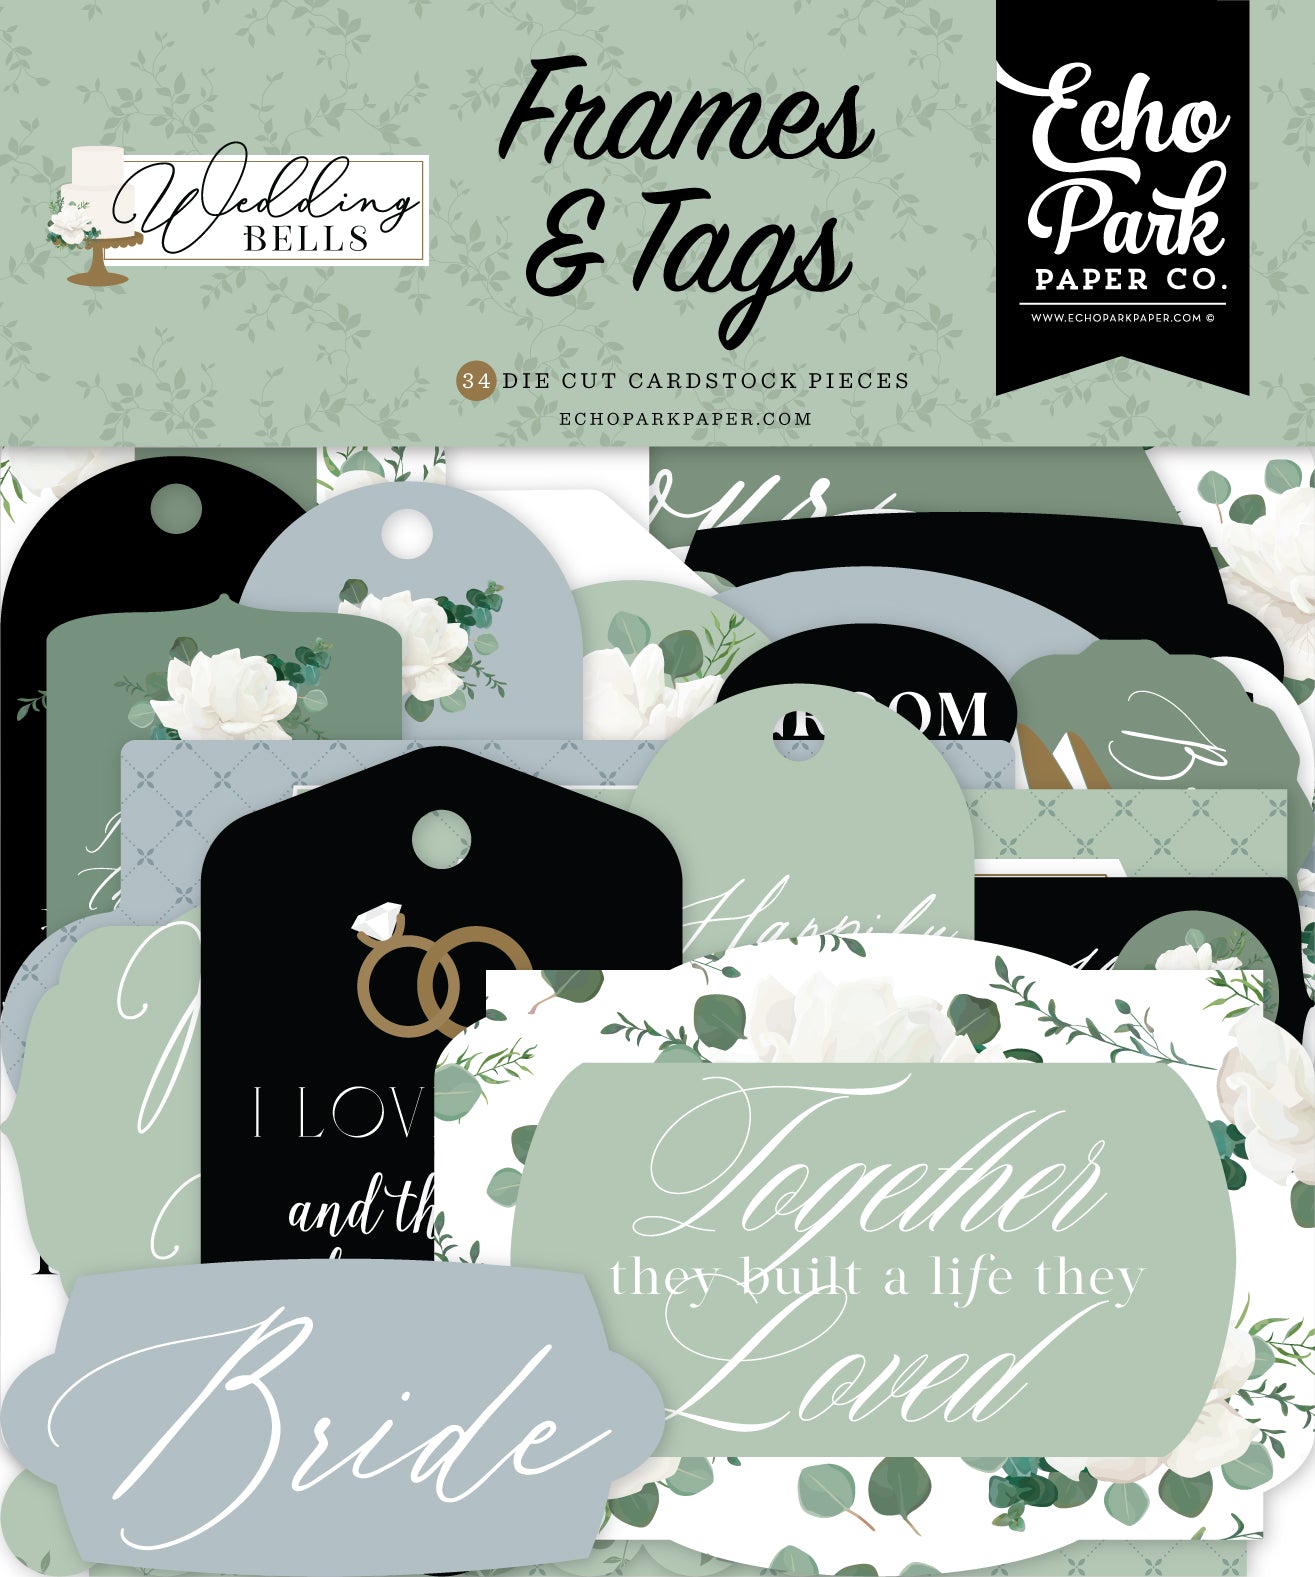 Wedding Bells Collection 5 x 5 Scrapbook Frames & Tags by Echo Park